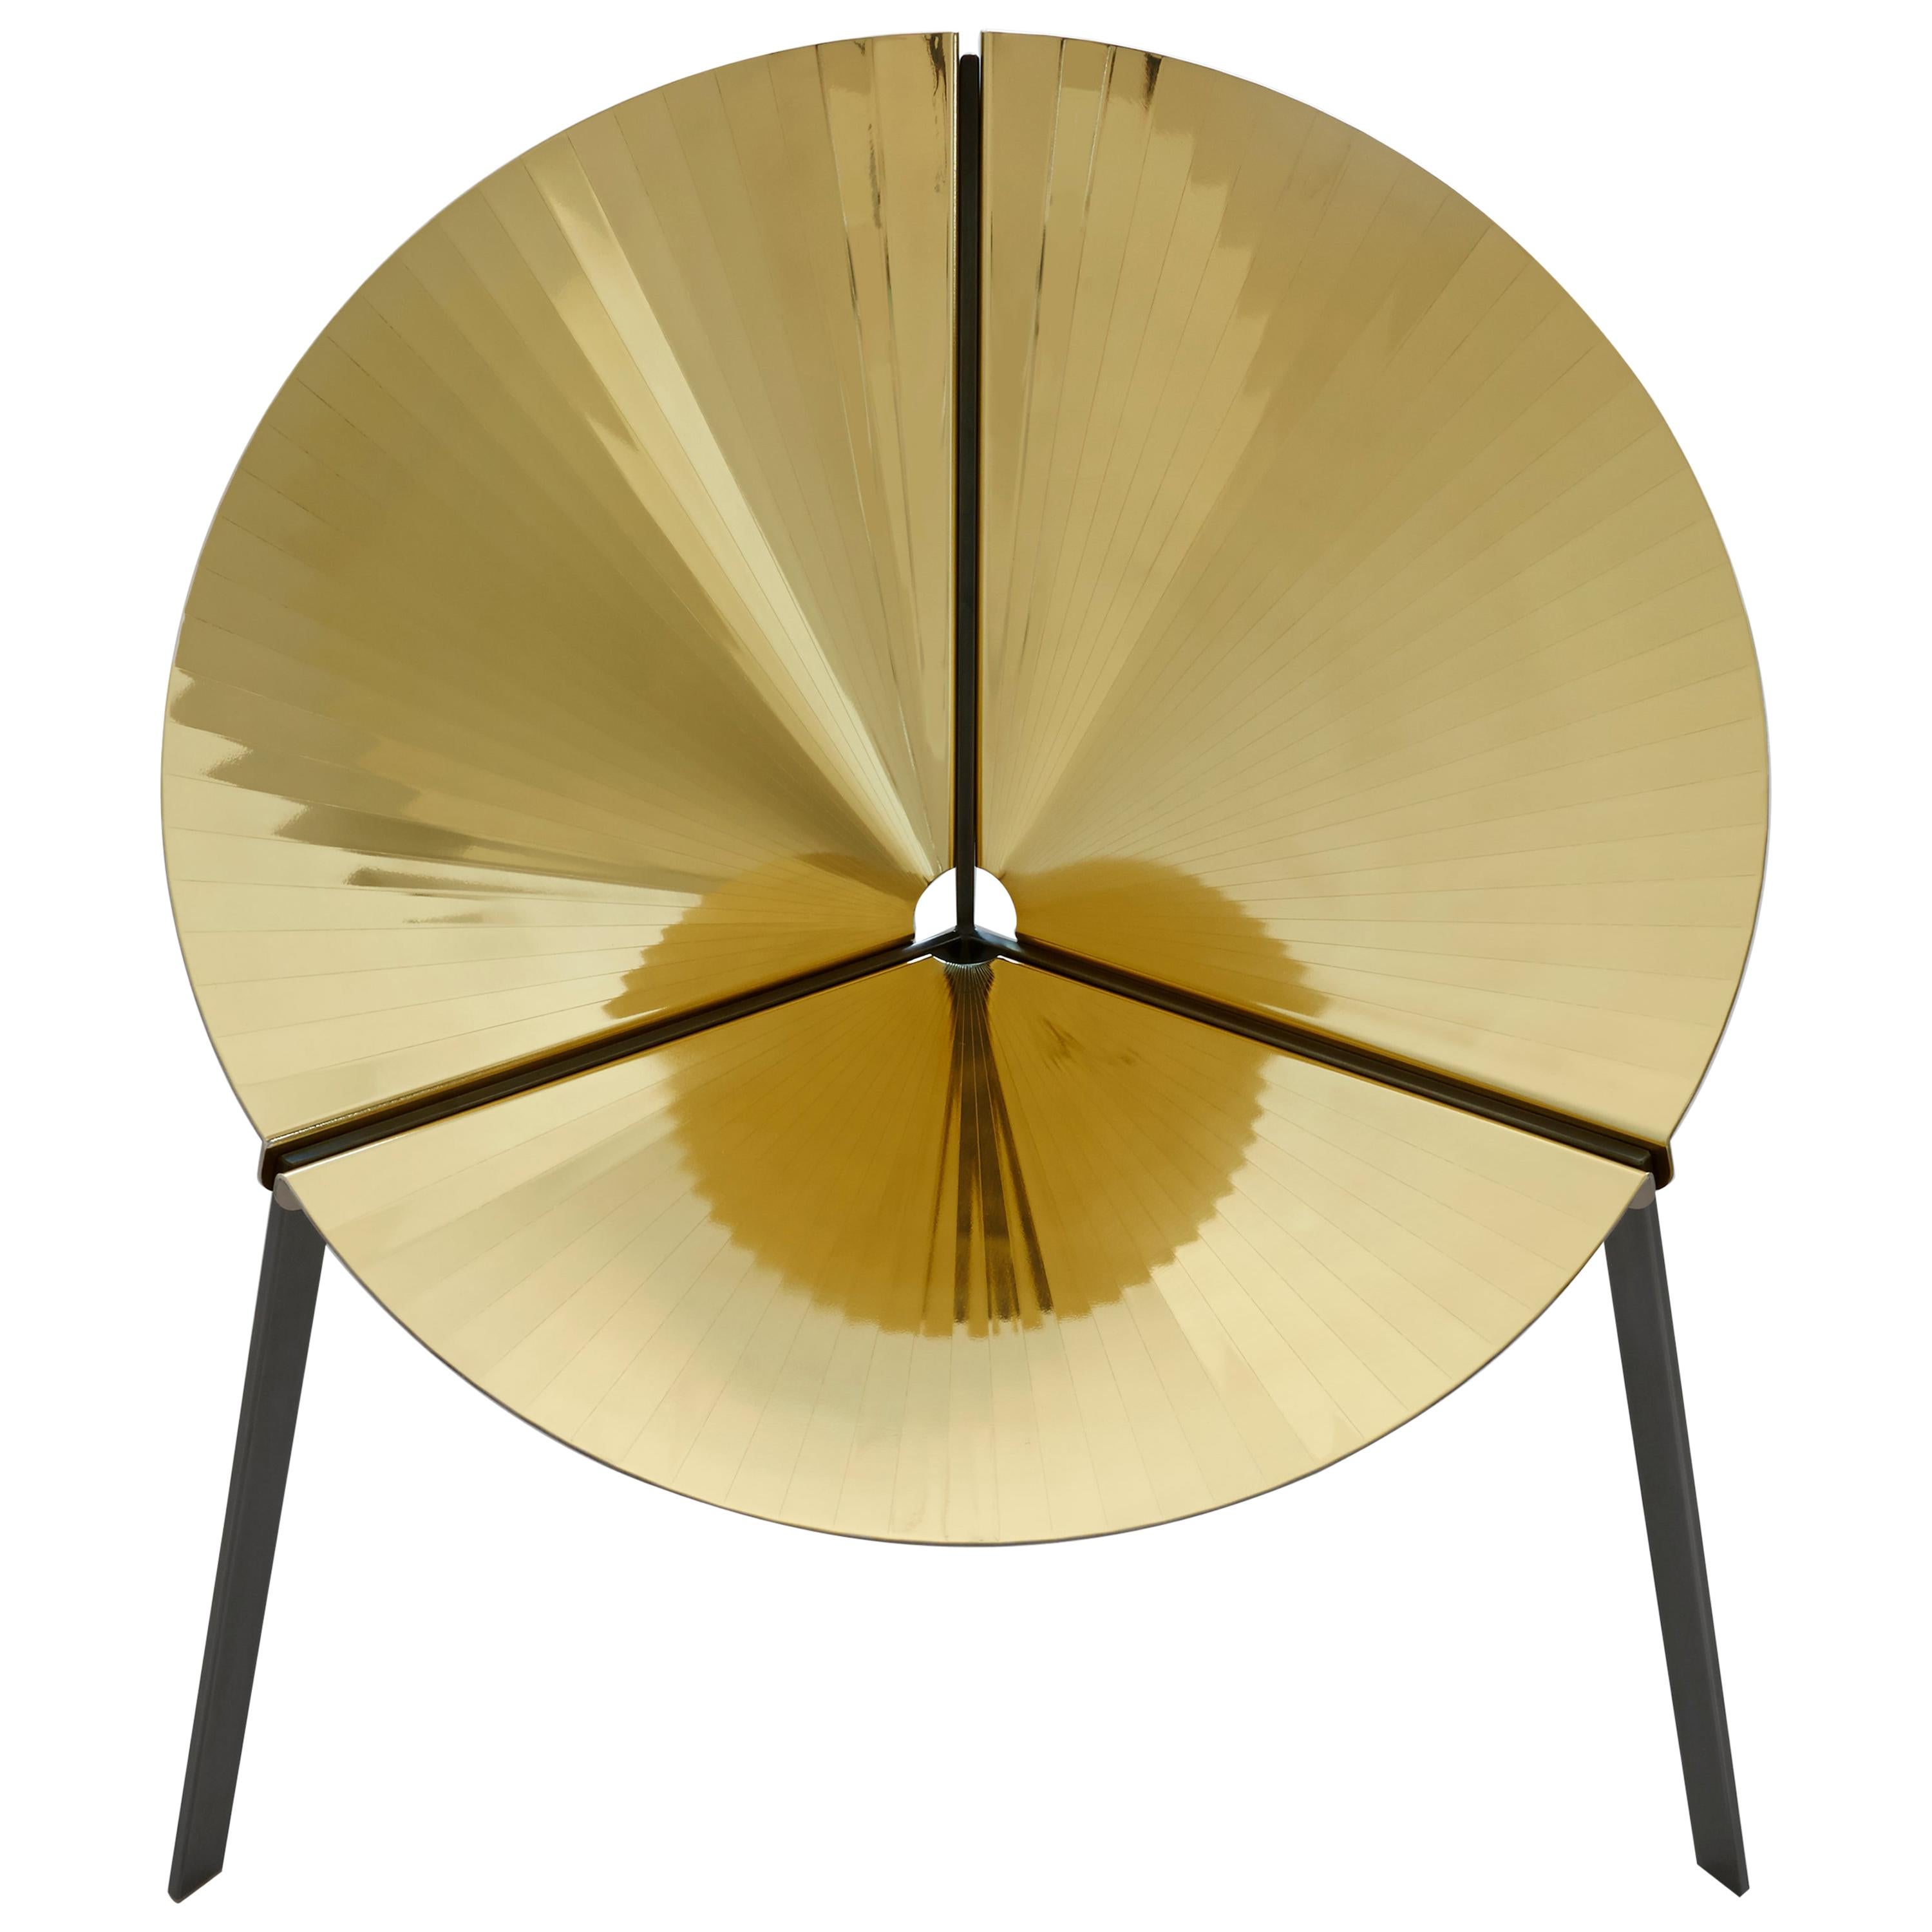 DeCastelli Pensando Ad Acapulco Chair in Polished Brass by IvDesign